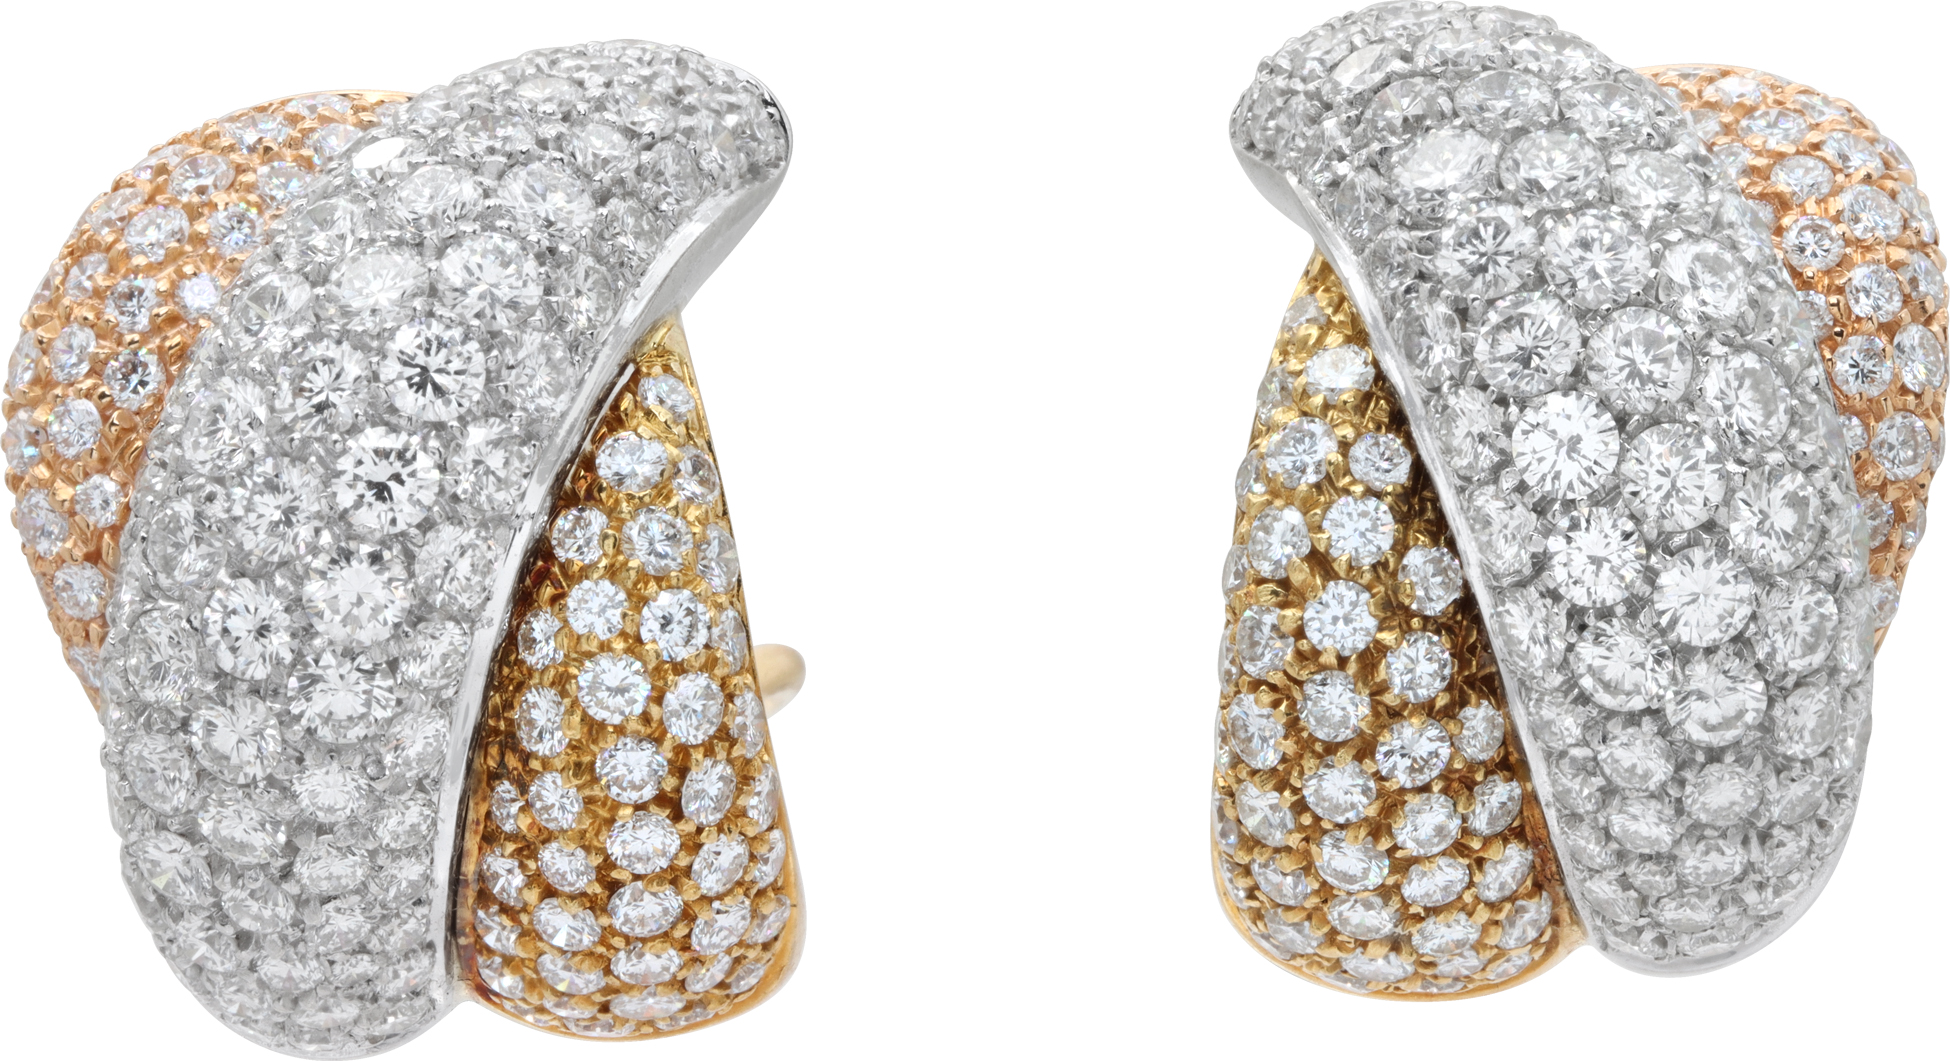 Damiani Gomitolo tricolor diamond earrings in 18k white yellow & rose gold